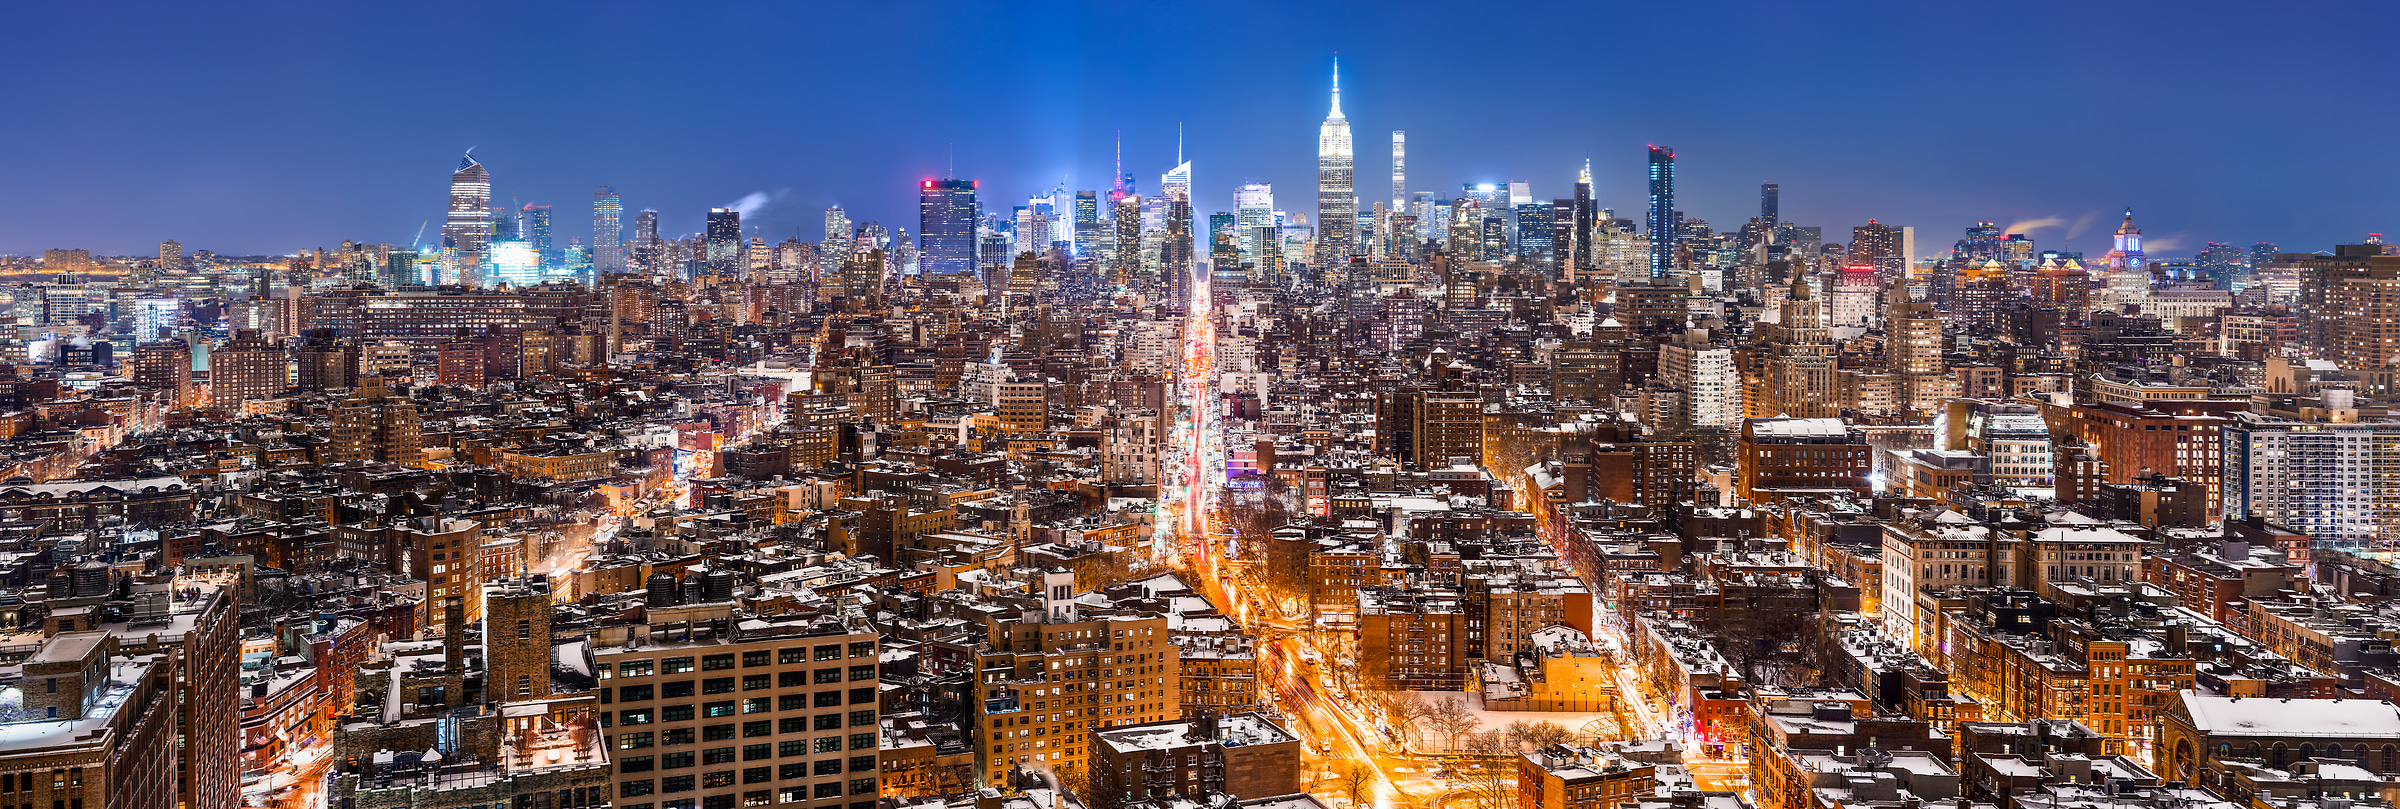 5,910 megapixels! A very high resolution, large-format VAST photo print of the NYC skyline in winter snow at night; cityscape fine art photo created by Dan Piech in New York City